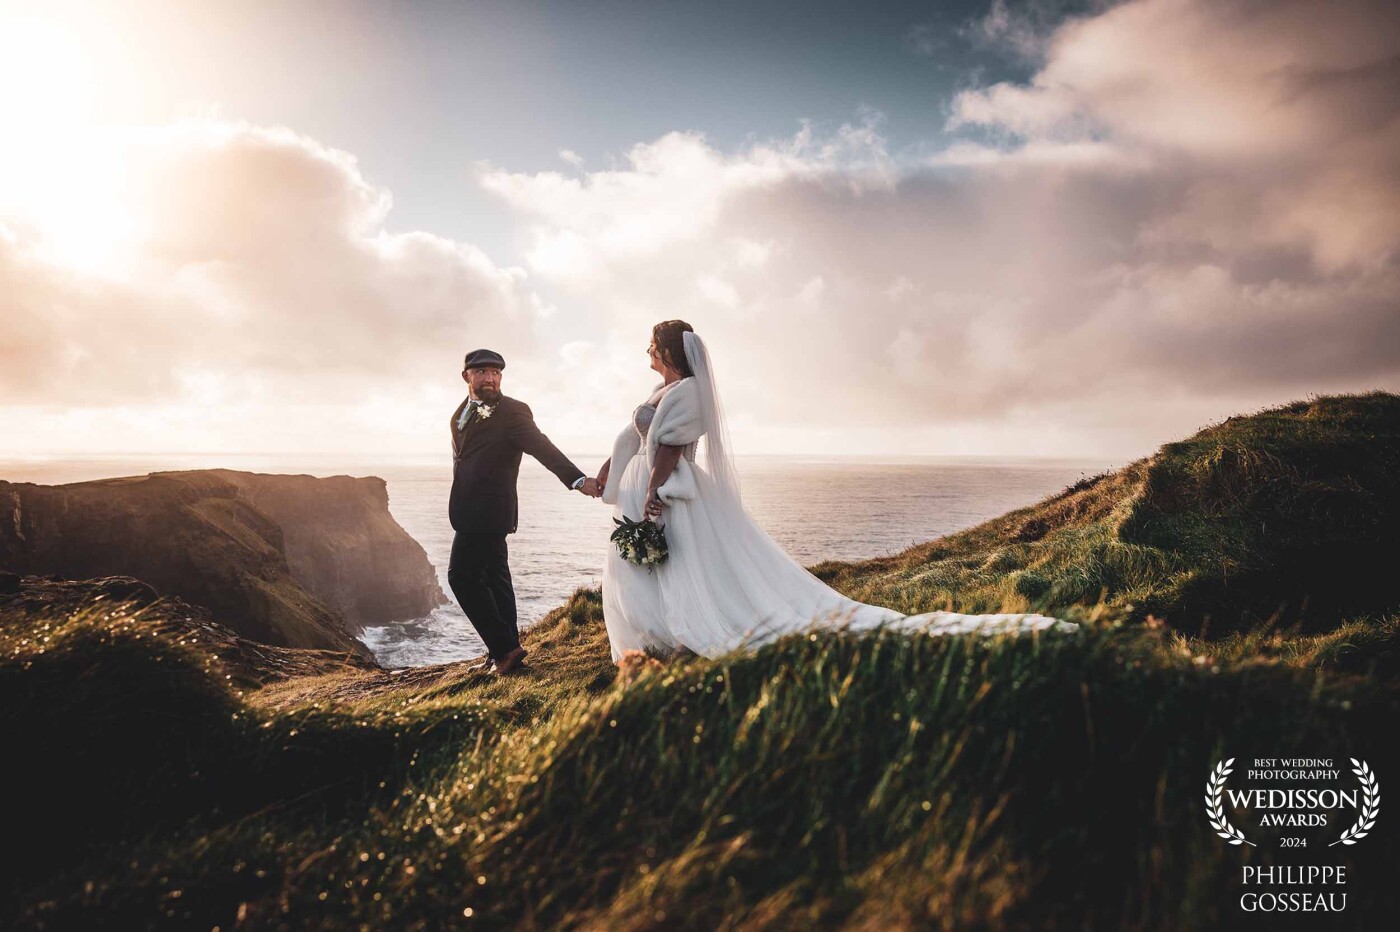 Emma & Ryan's wonderful Winter Elopement at the Cliffs of Moher, Ireland.<br />
This is how beautiful a late December wedding can be with a little bit of luck on the weather side.